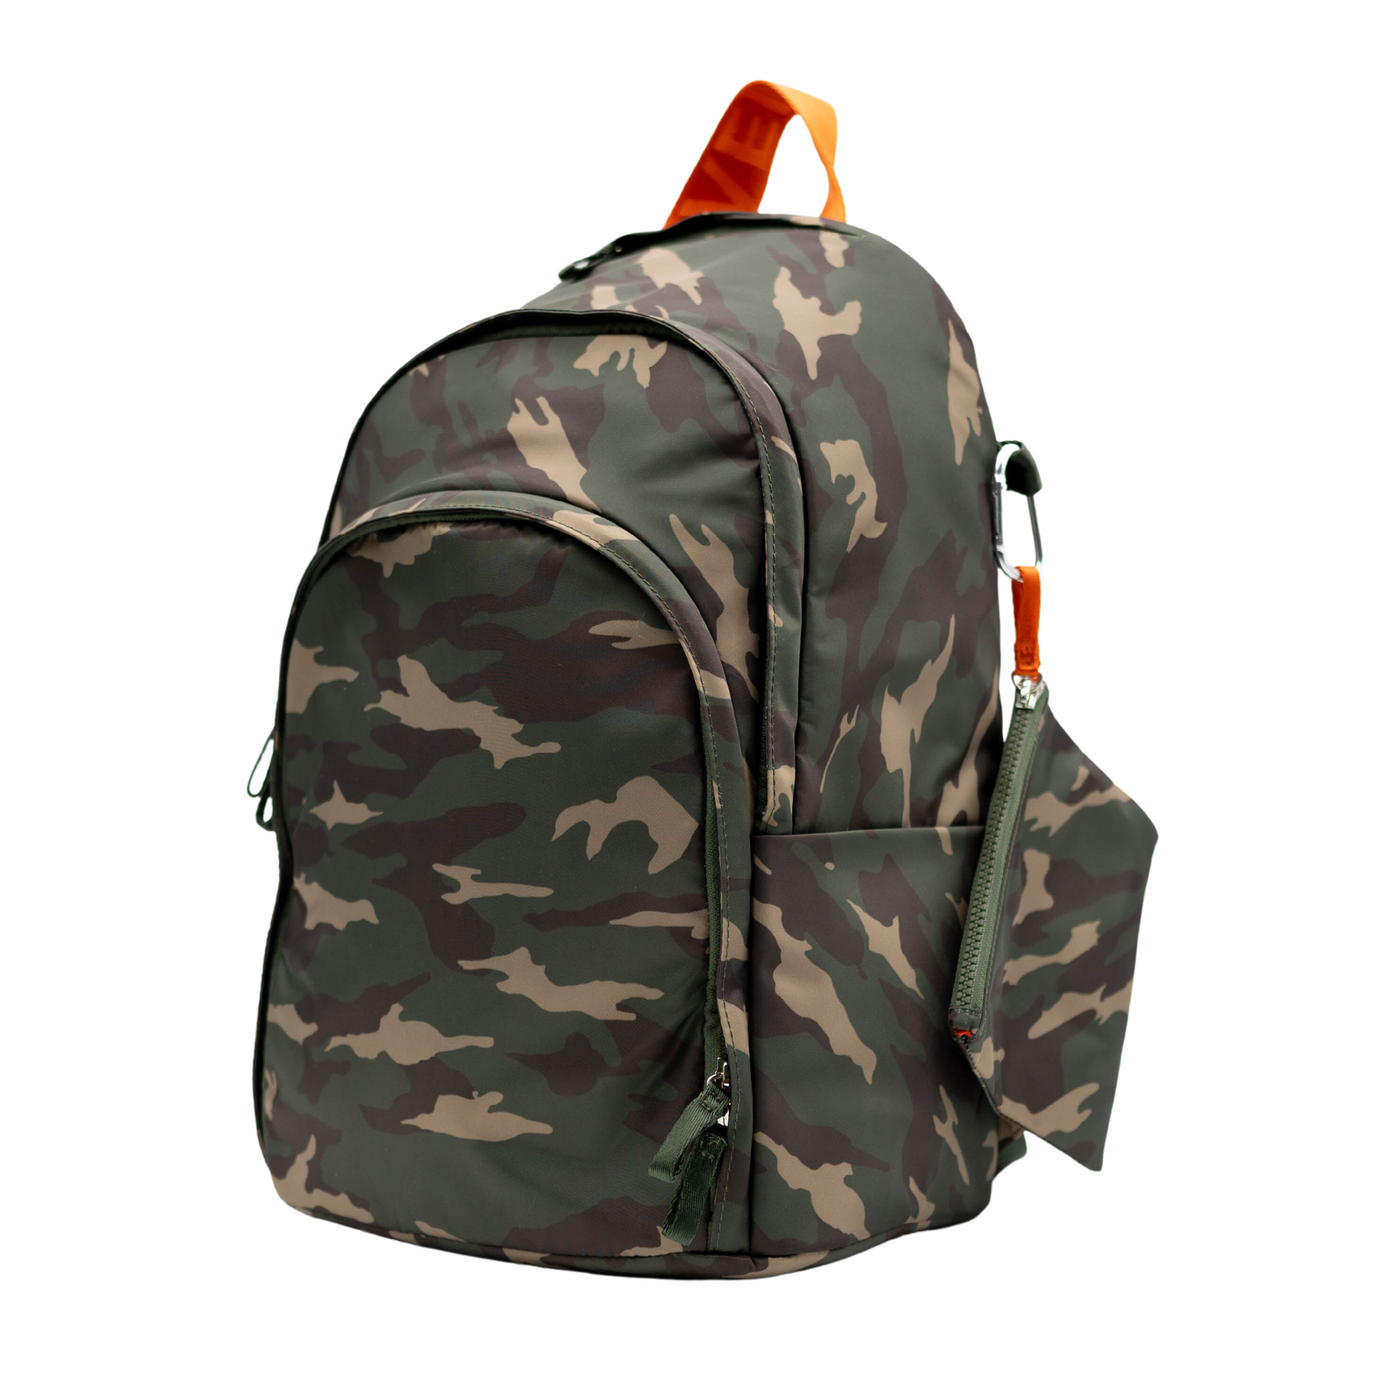 Delaire Backpack - Green Camo